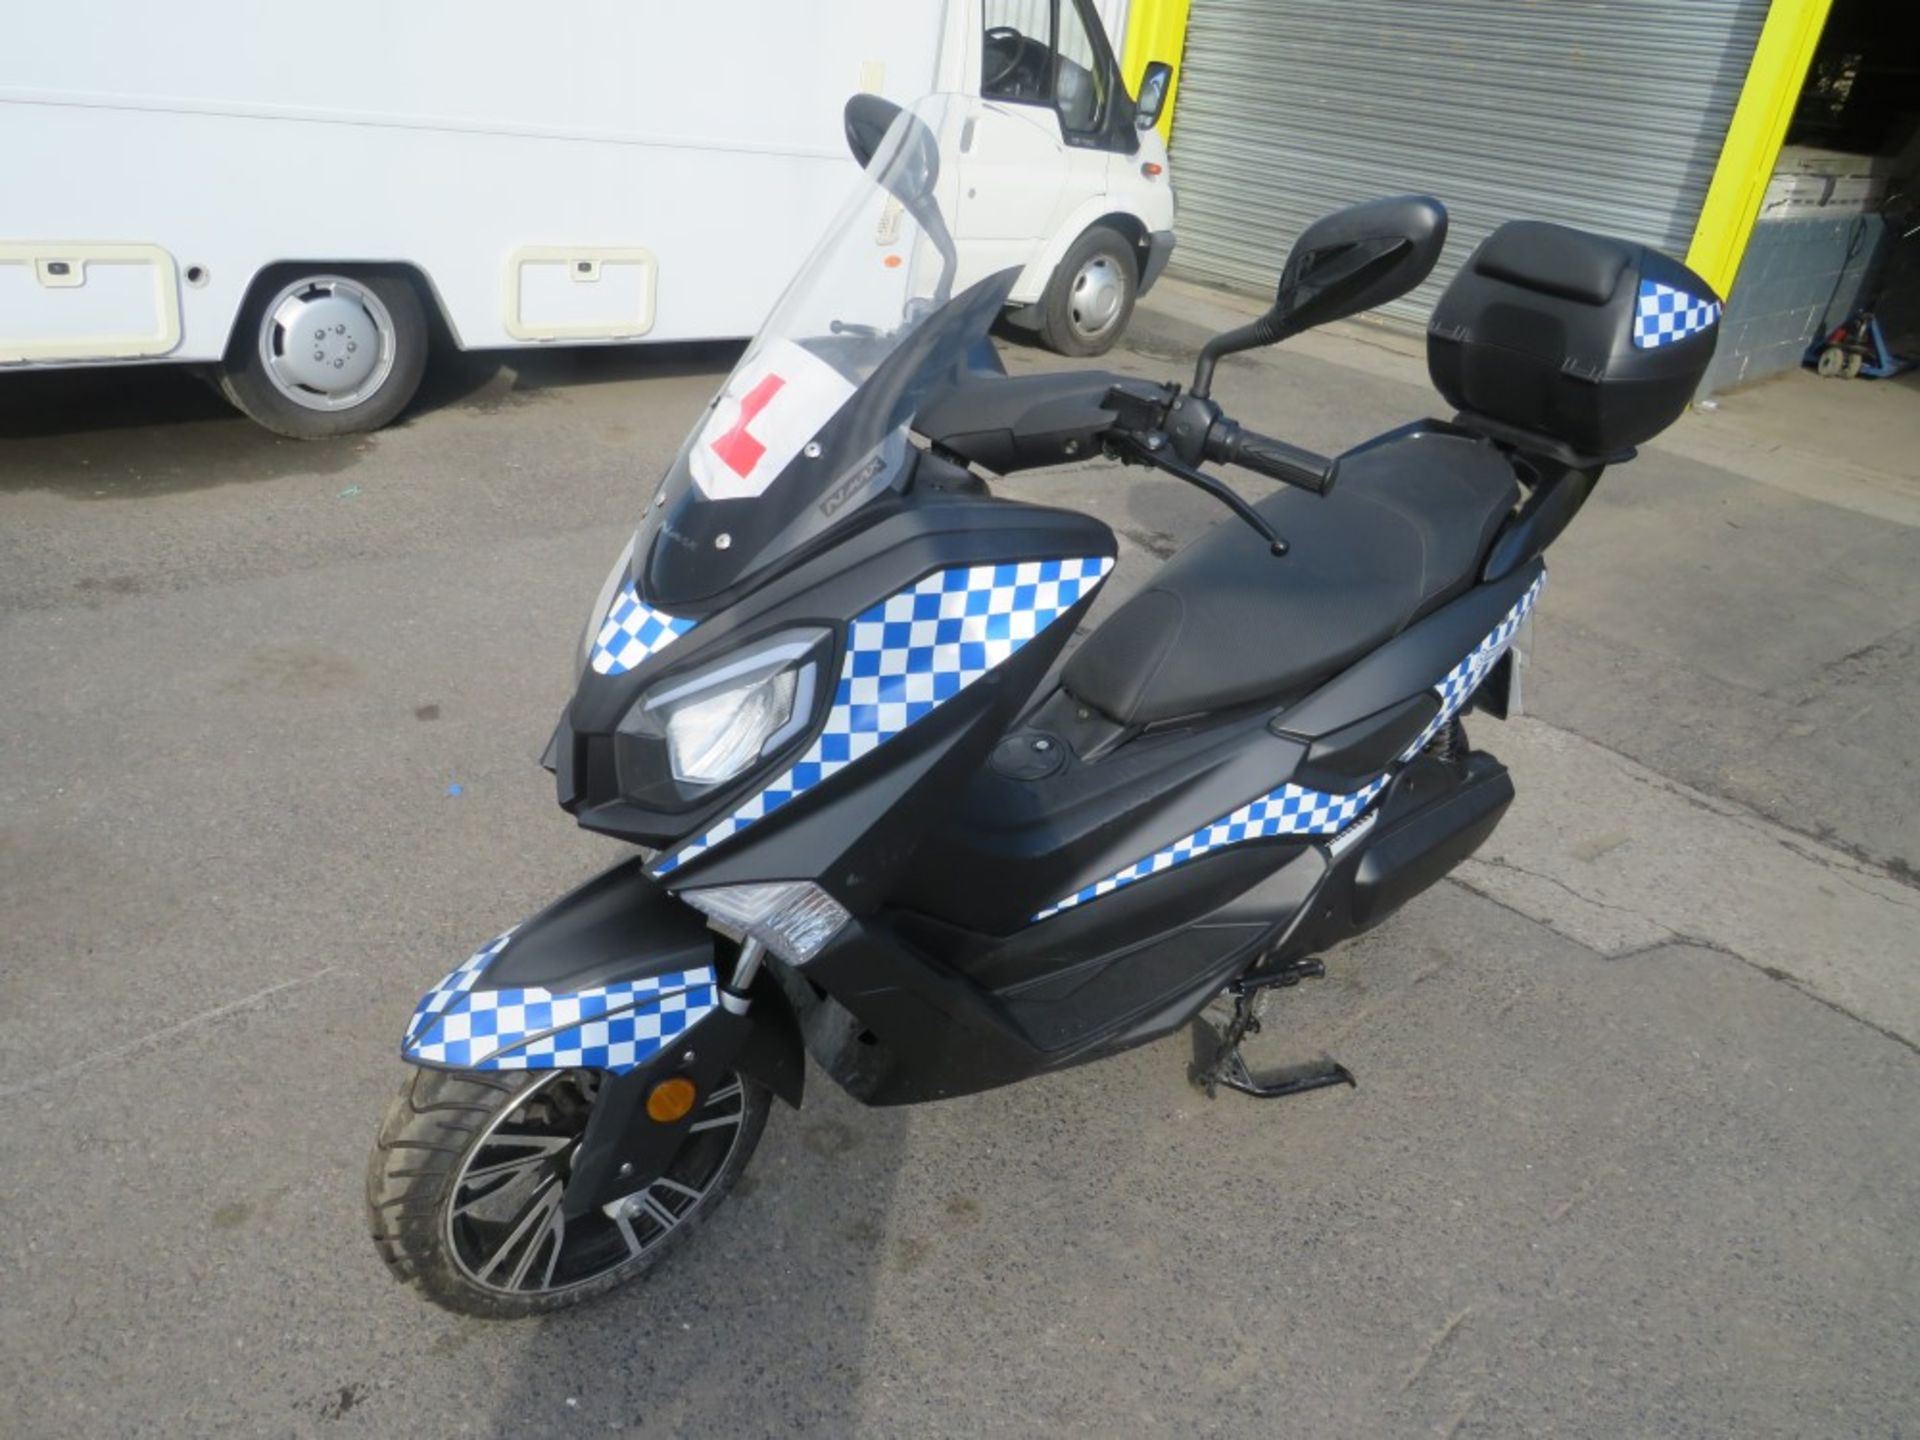 70 reg EFUN TIGER LYNX ELECTRIC SCOOTER, 1ST REG 10/20, MILEAGE NOT DISPLAYING, V5 HERE, 1 FORMER - Image 2 of 4